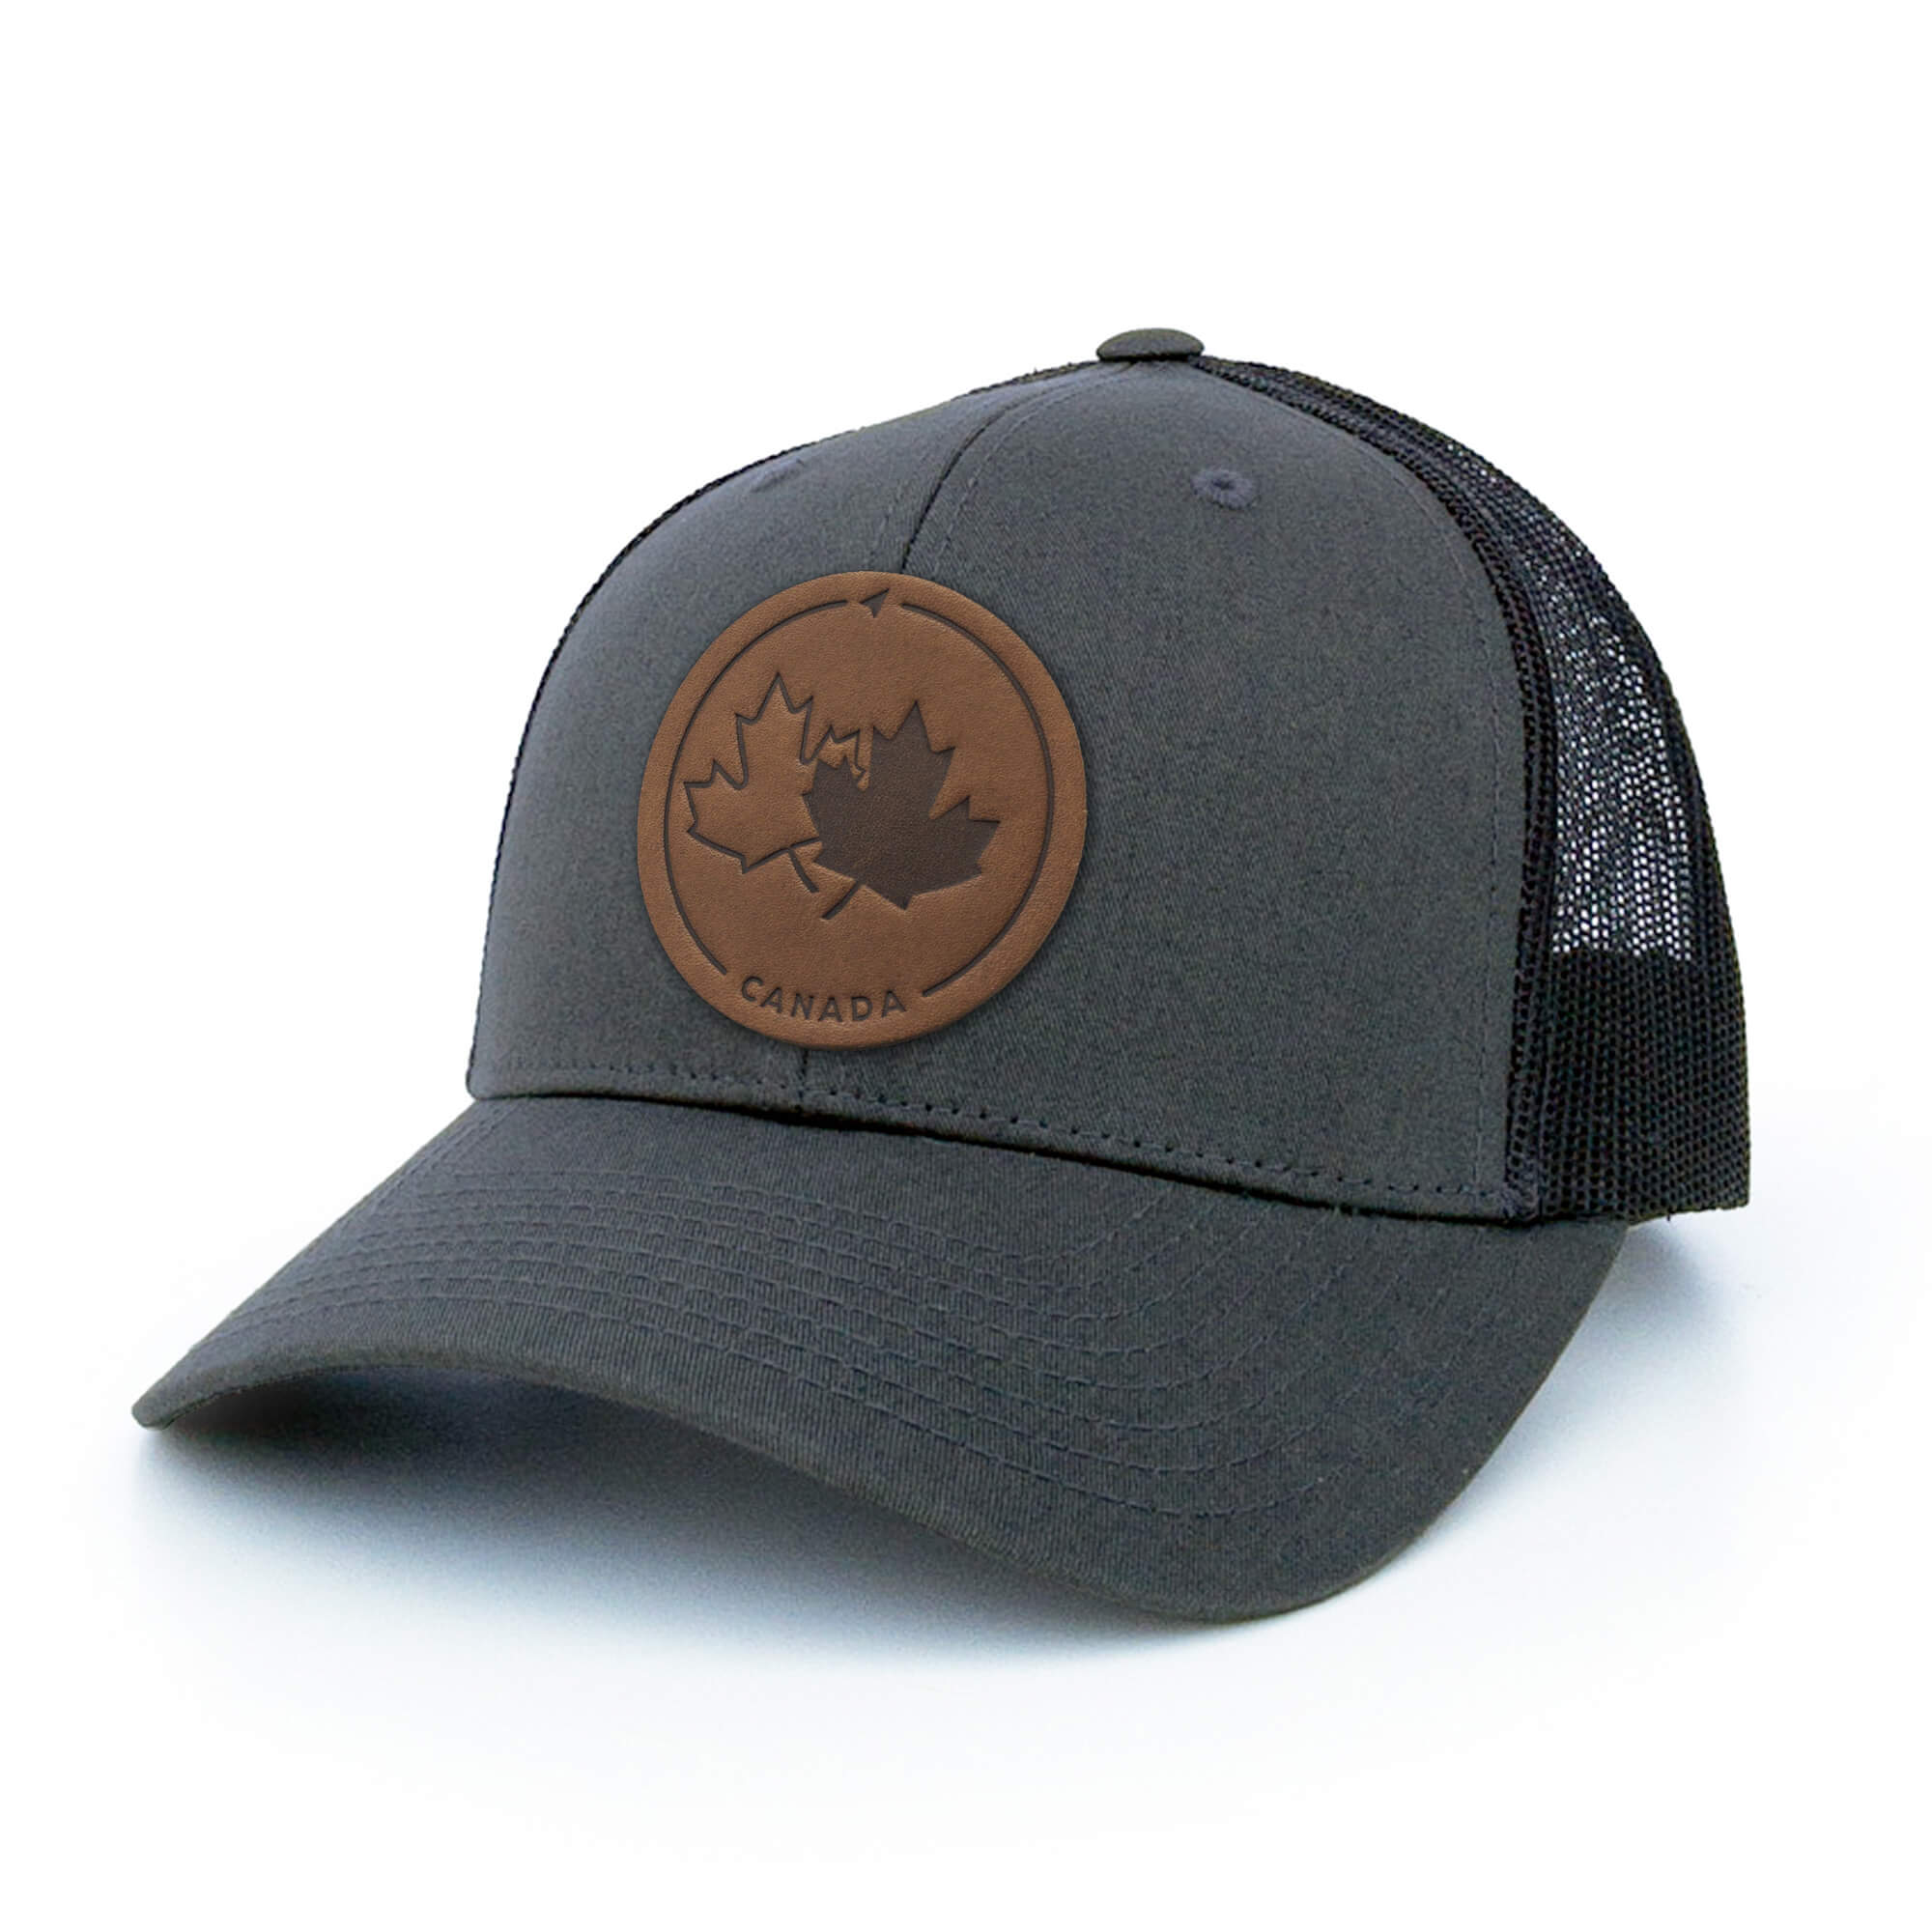 Charcoal trucker hat with full-grain leather patch of Canada Strong and Free | BLACK-002-010, CHARC-002-010, NAVY-002-010, HGREY-002-010, MOSS-002-010, BROWN-002-010, RED-002-010